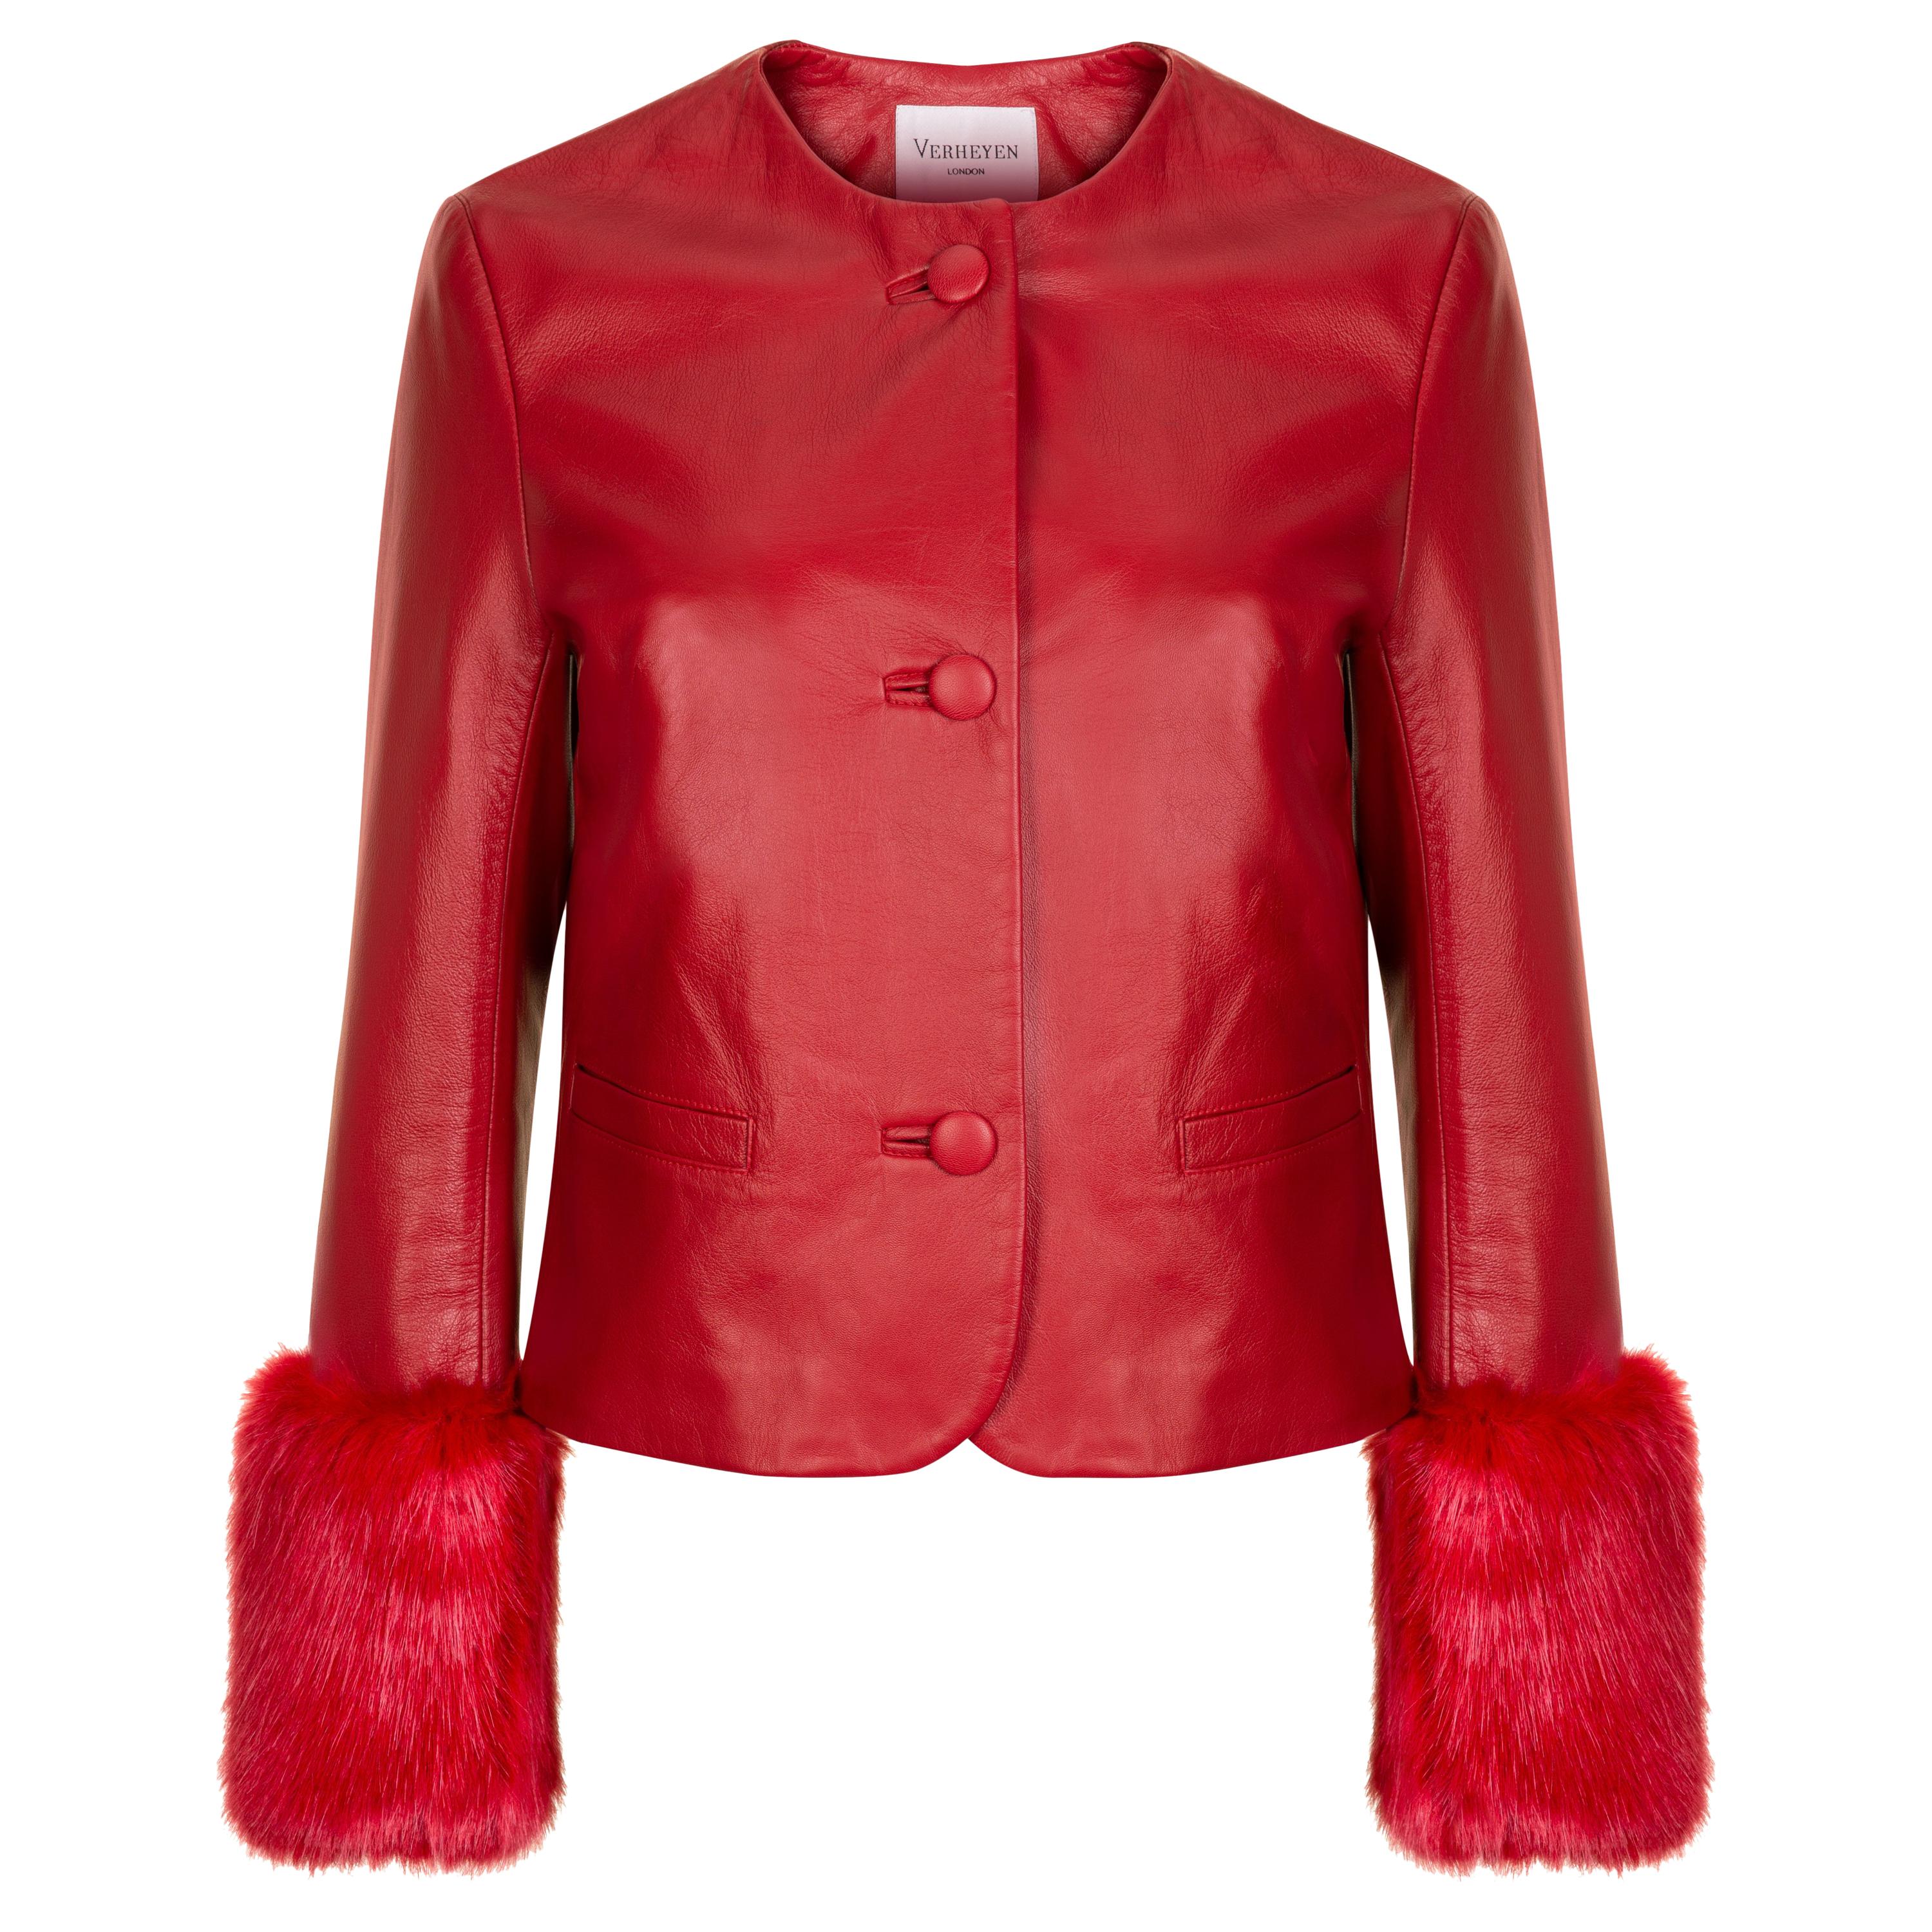 Verheyen Vita Cropped Jacket in Red Leather with Faux Fur - Size uk 8